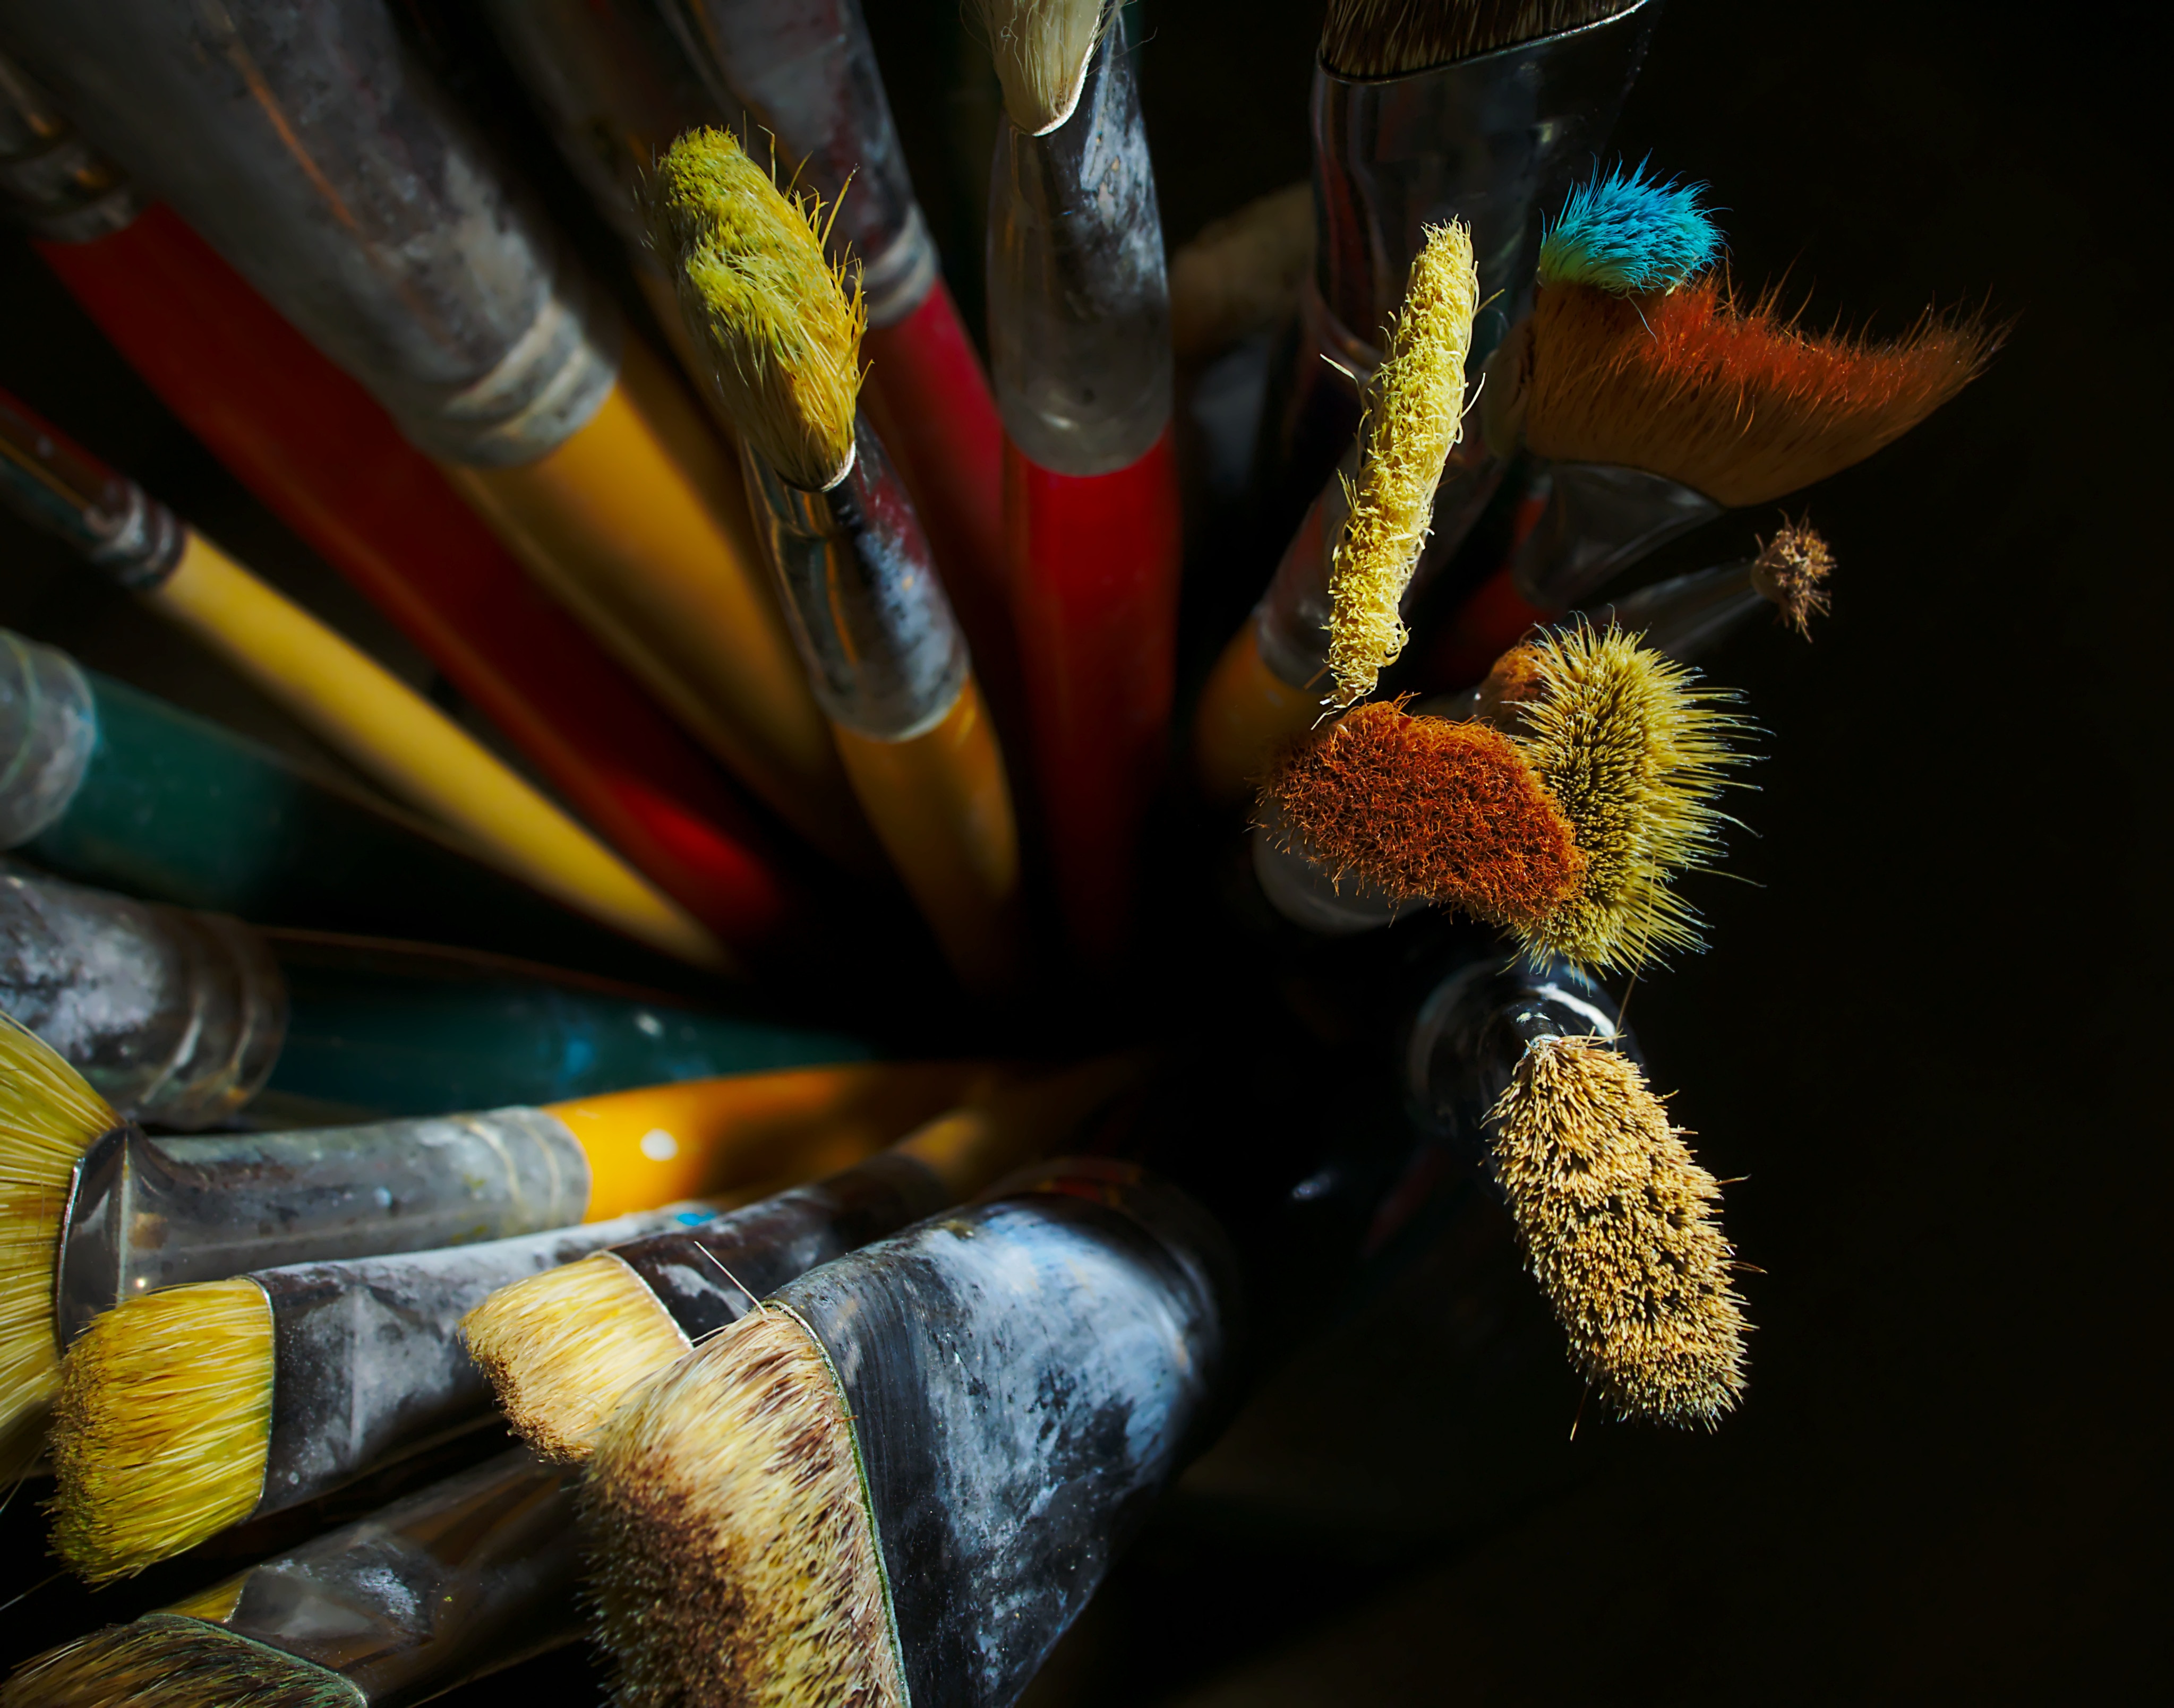 painting, brushes, miscellanea, miscellaneous, wood, wooden, multicolored, motley, drawing, tassels Full HD